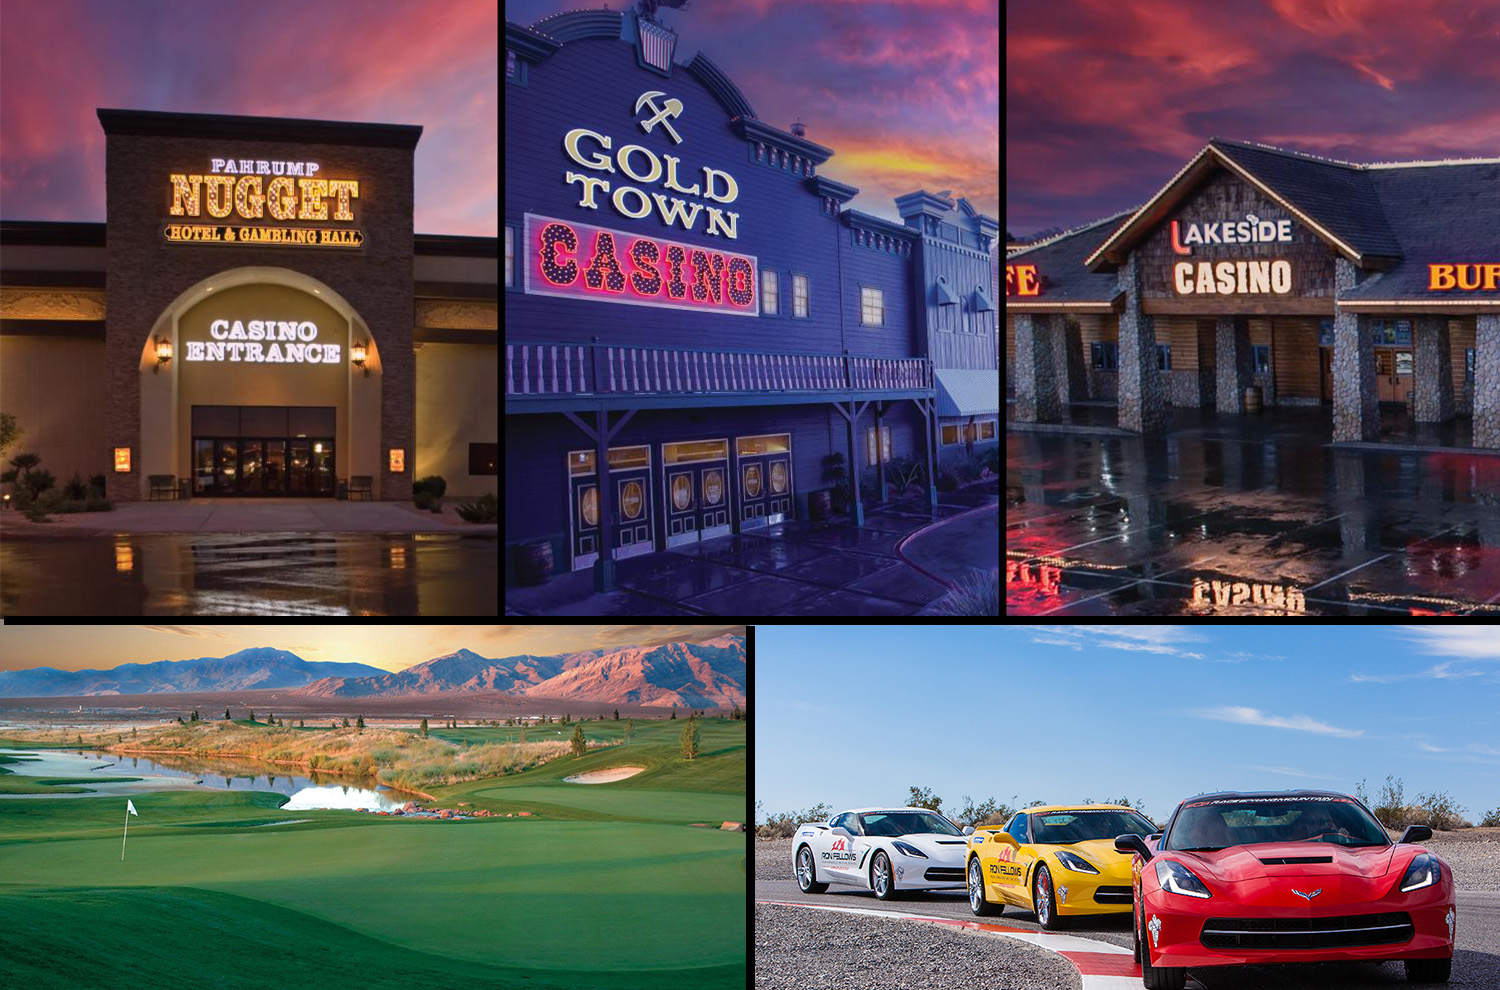 Image collage featuring the exterior of three Nevada casinos